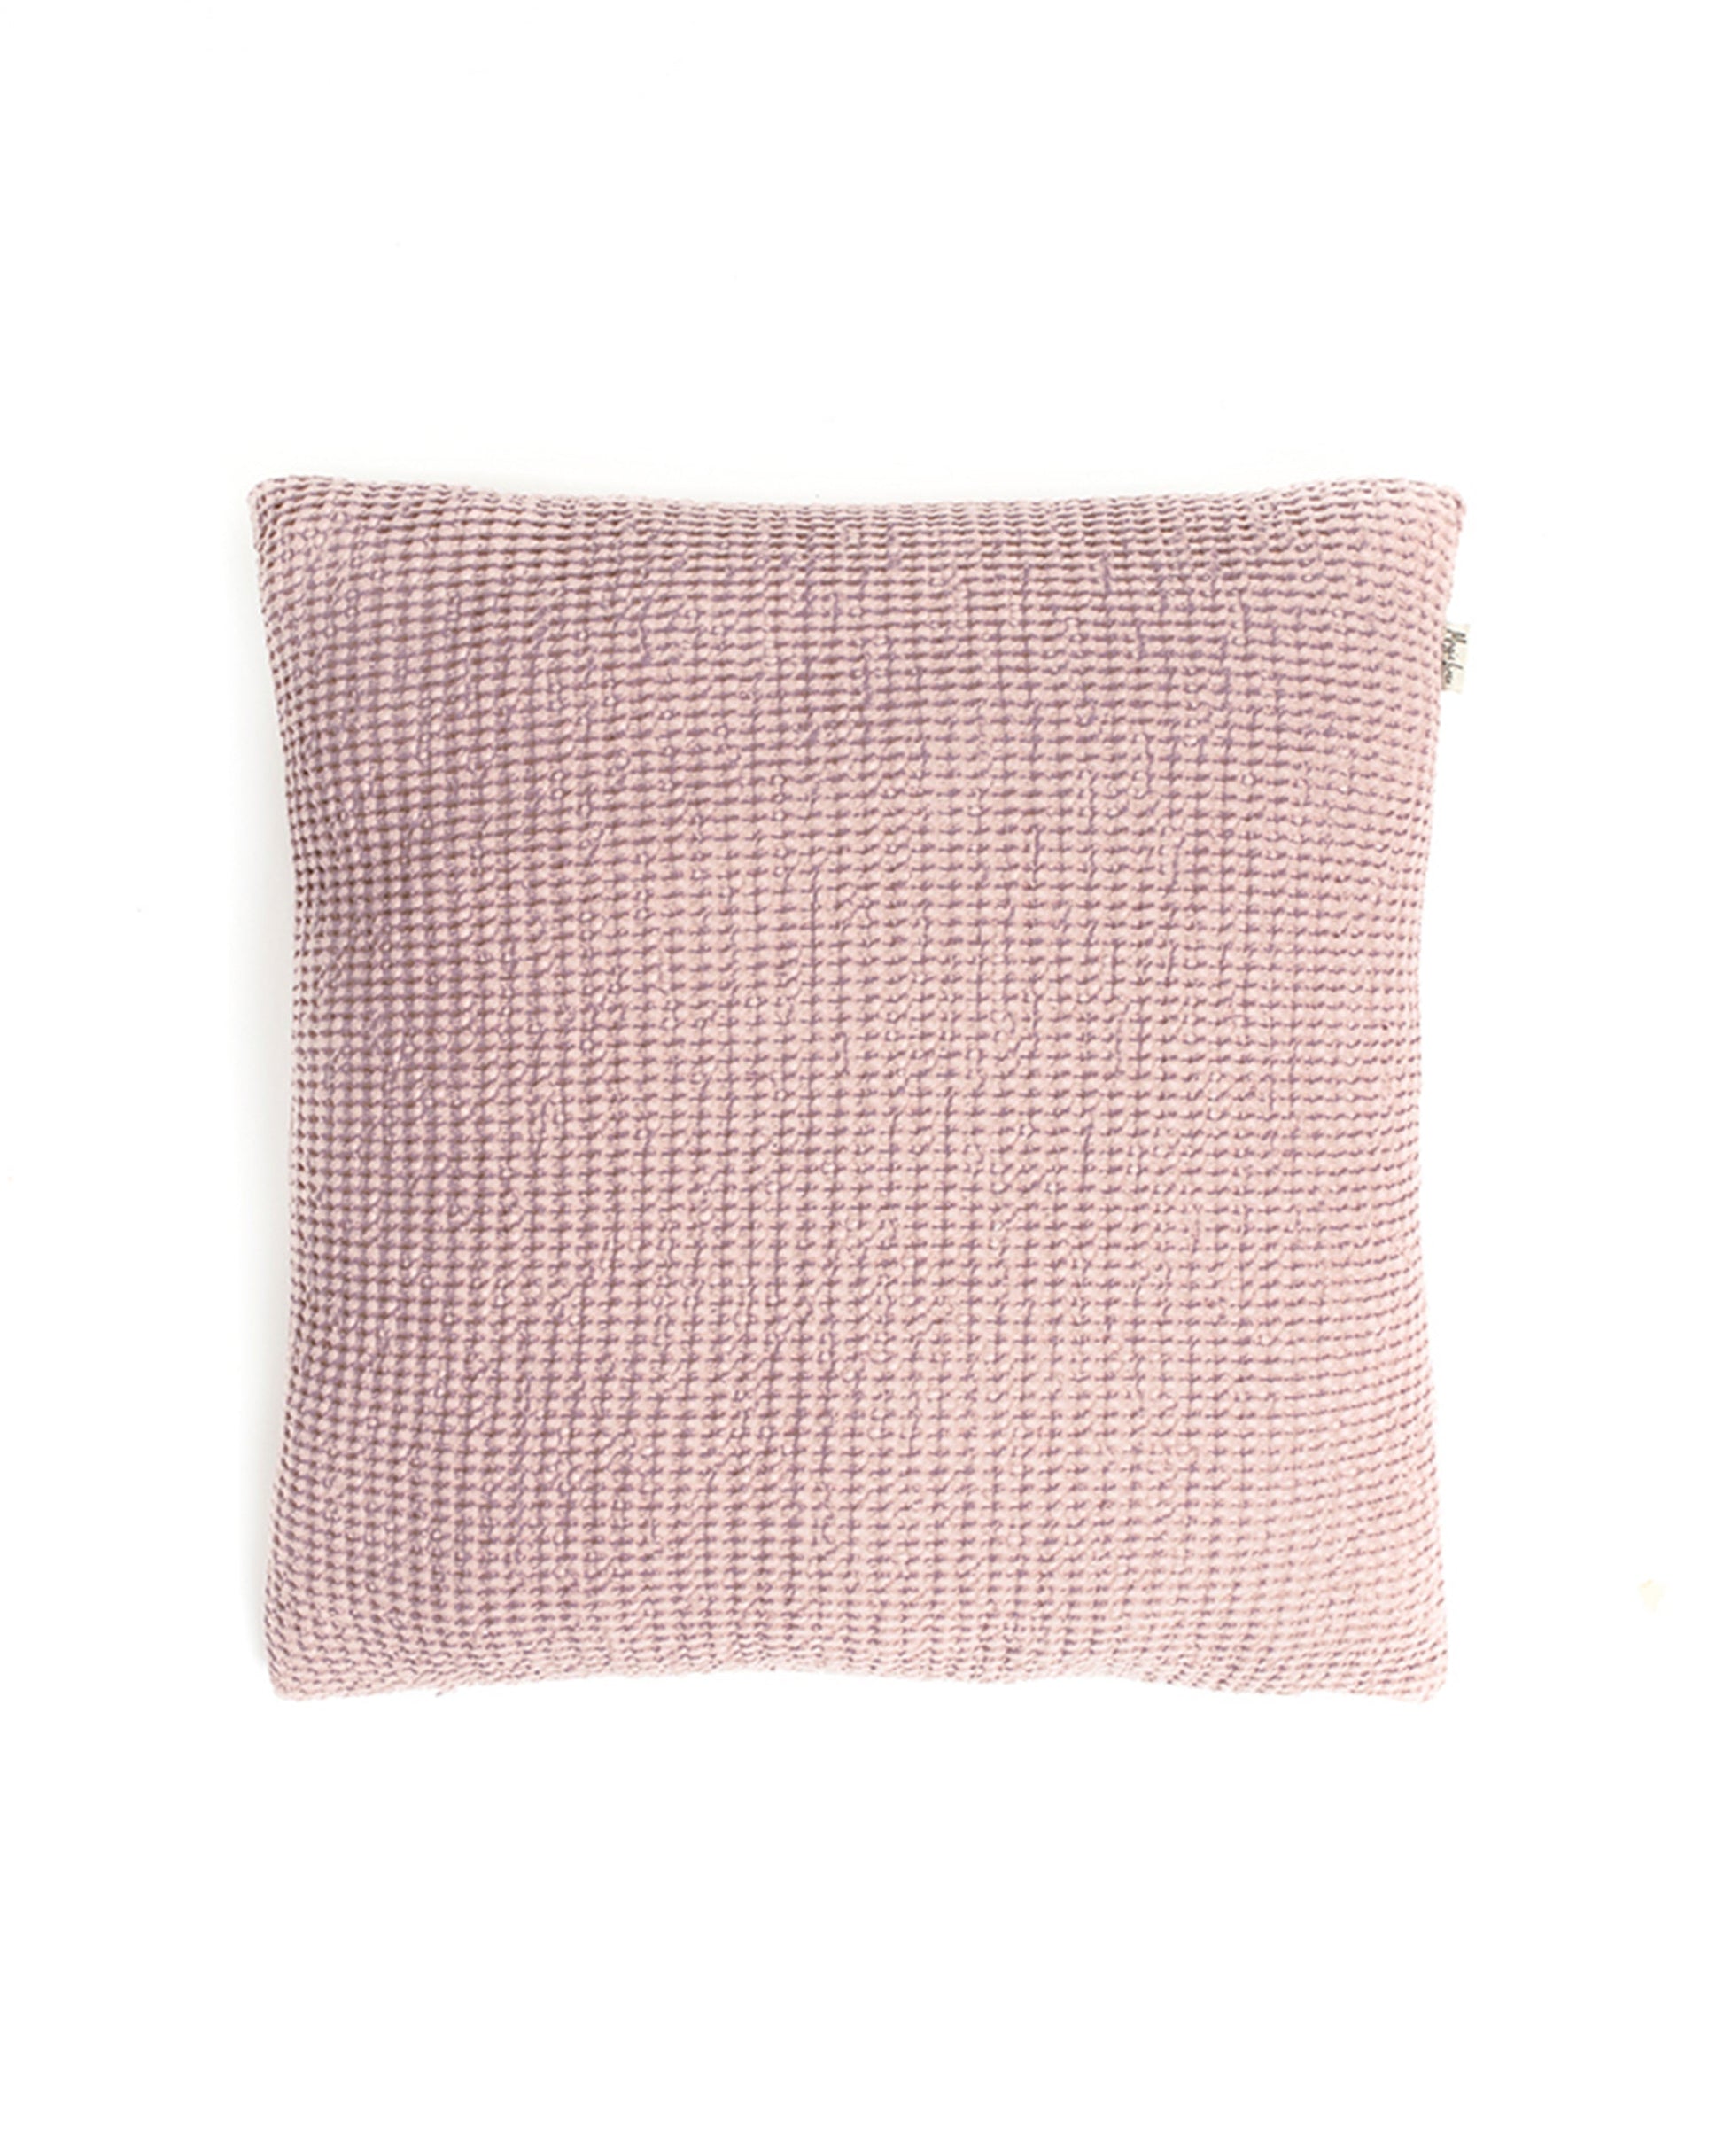 Waffle throw pillow cover in Woodrose - MagicLinen